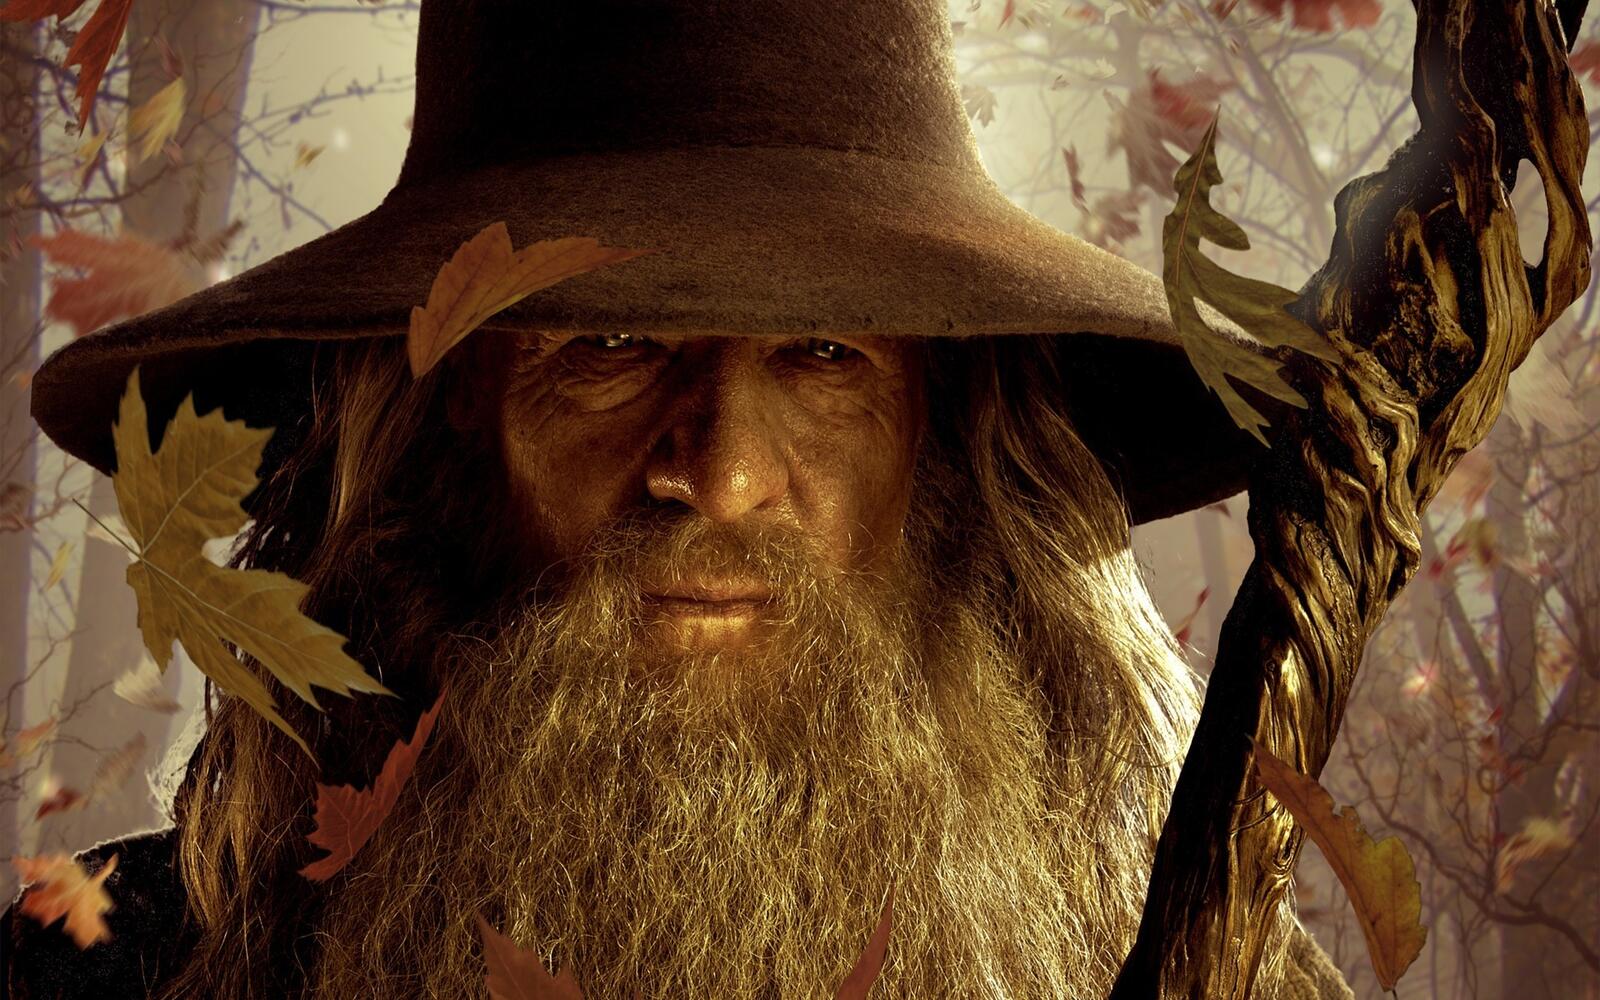 Wallpapers gandalf hobbit lord of the rings on the desktop